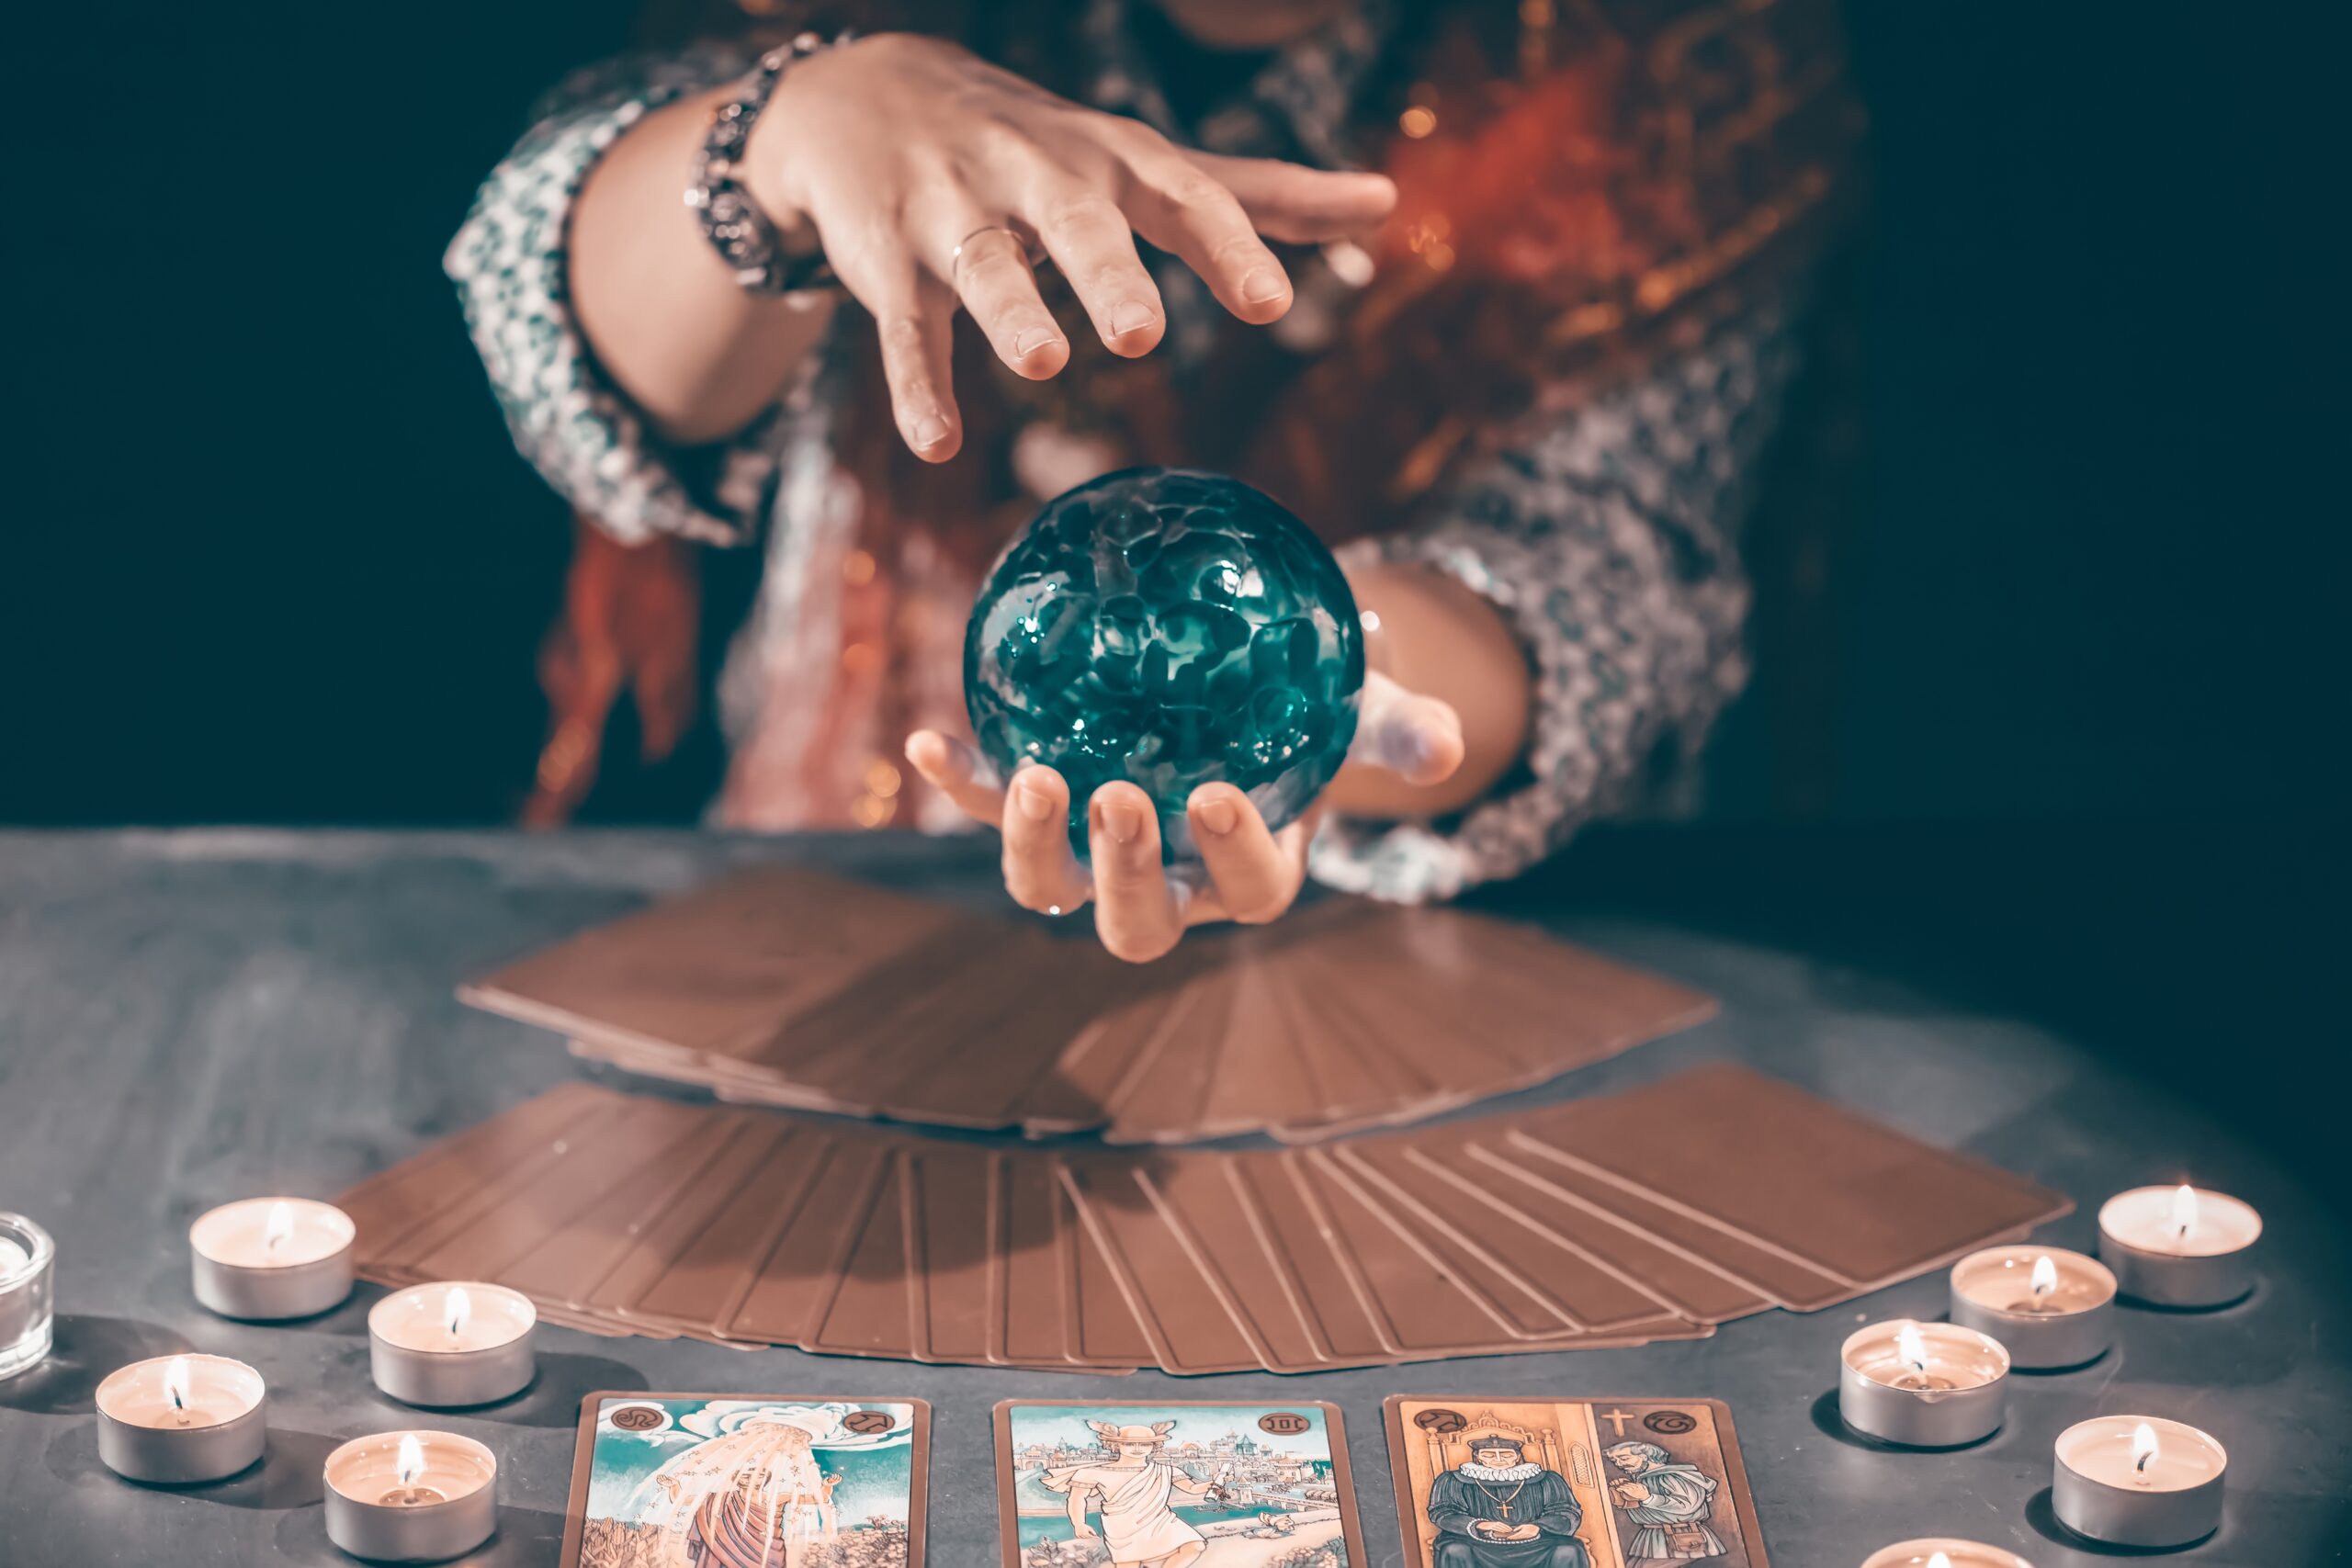 Fortune teller with tarot cards on table near burning candles.